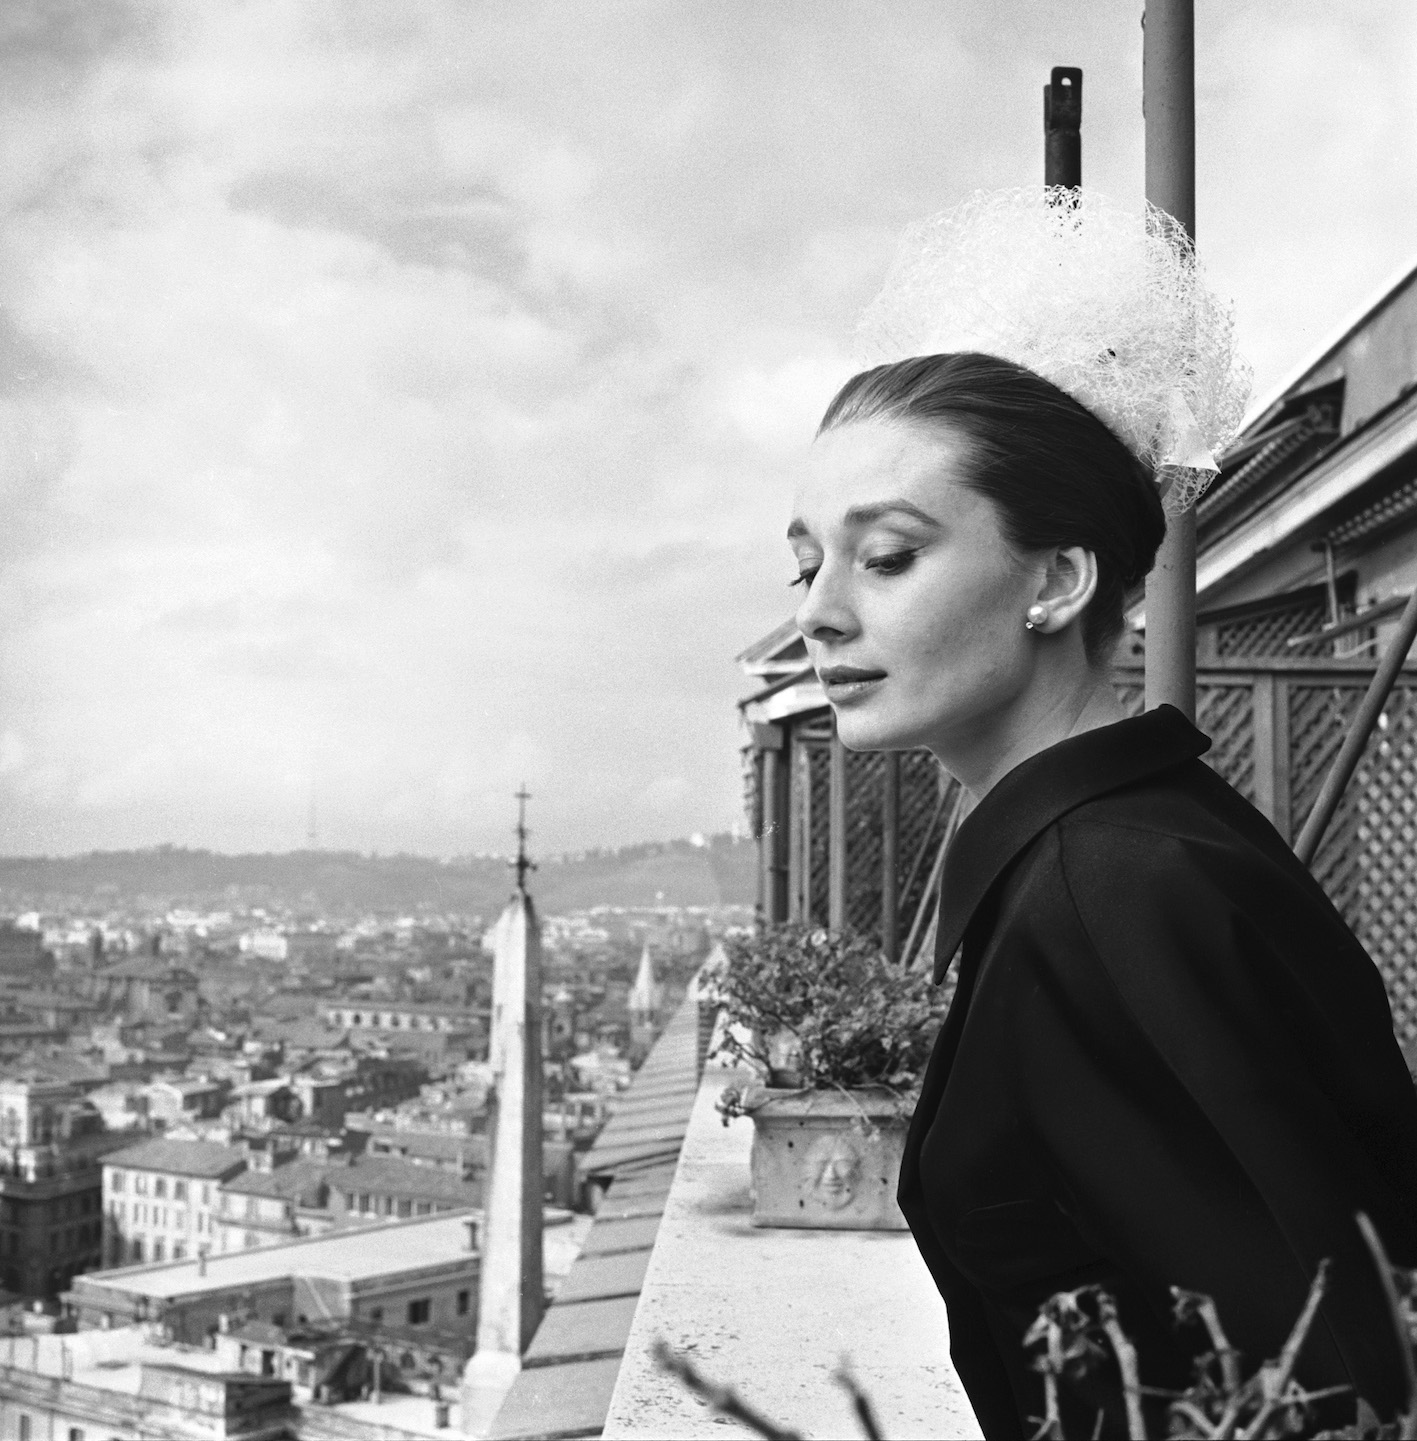 Audrey Hepburn in Rome by Cecil Beaton, 1960 ©The Cecil Beaton Studio Archive at Sotheby’s